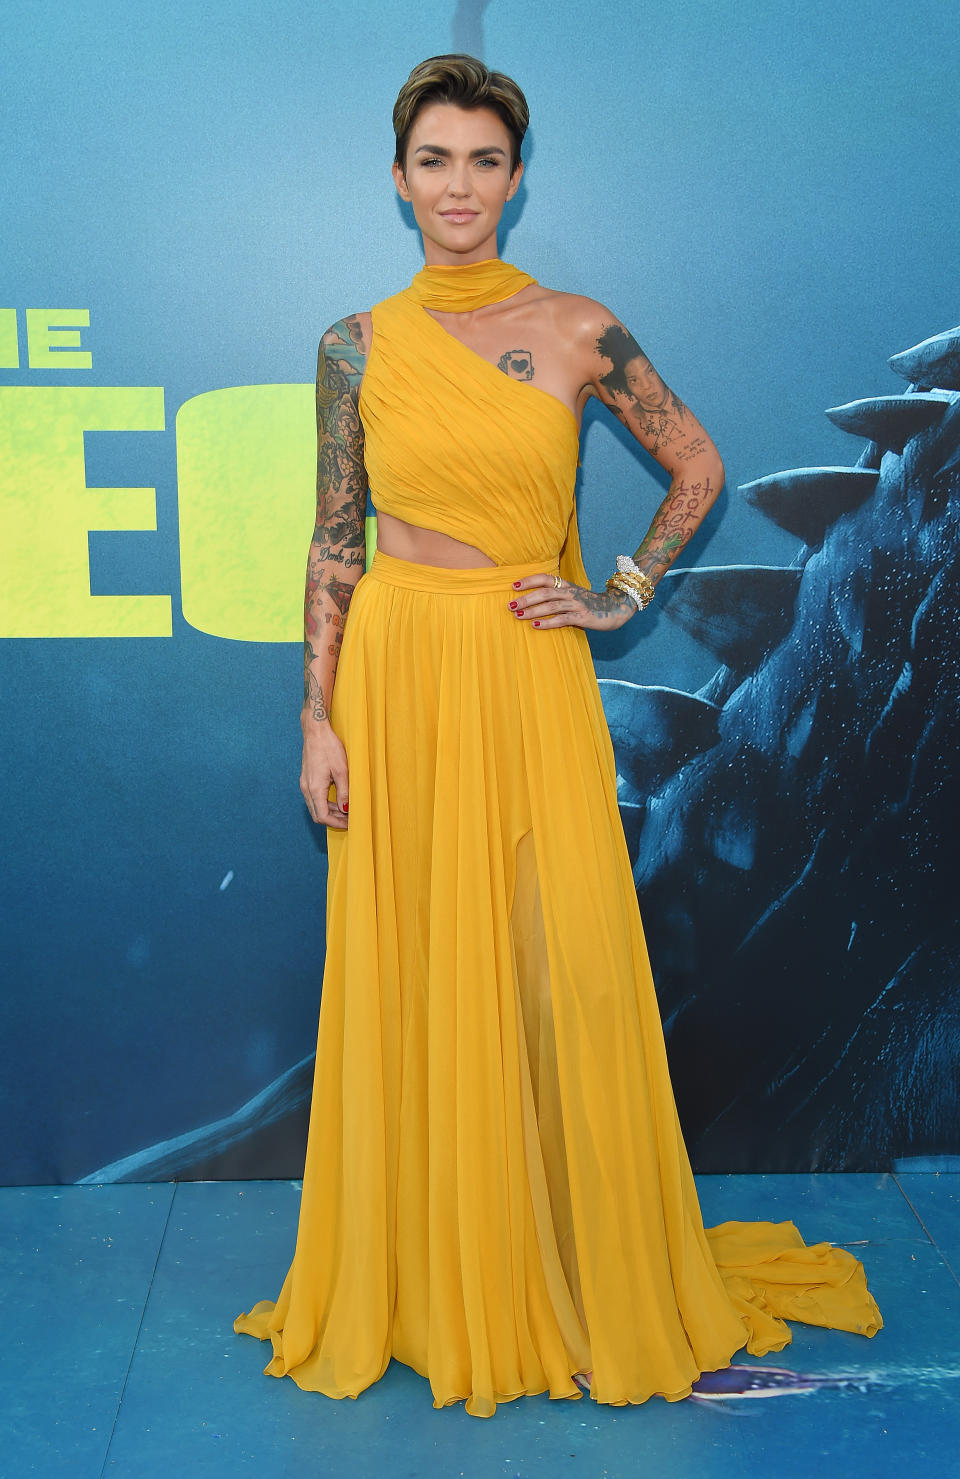 Ruby Rose at the premiere of ‘The Meg’